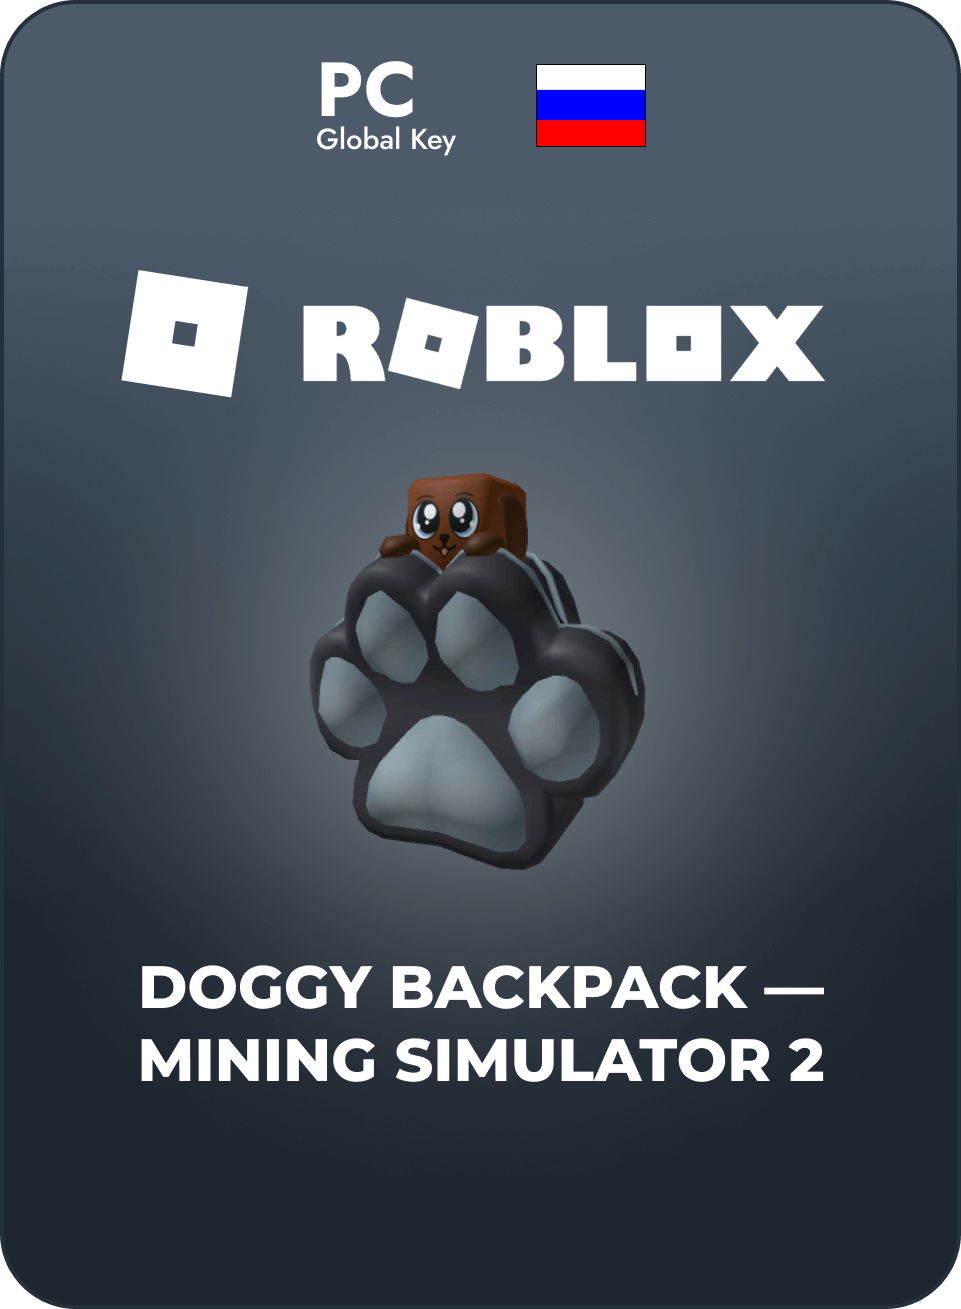 How to get the Doggy Backpack in Mining Simulator 2 - Roblox Prime Gaming  Free Item - Pro Game Guides